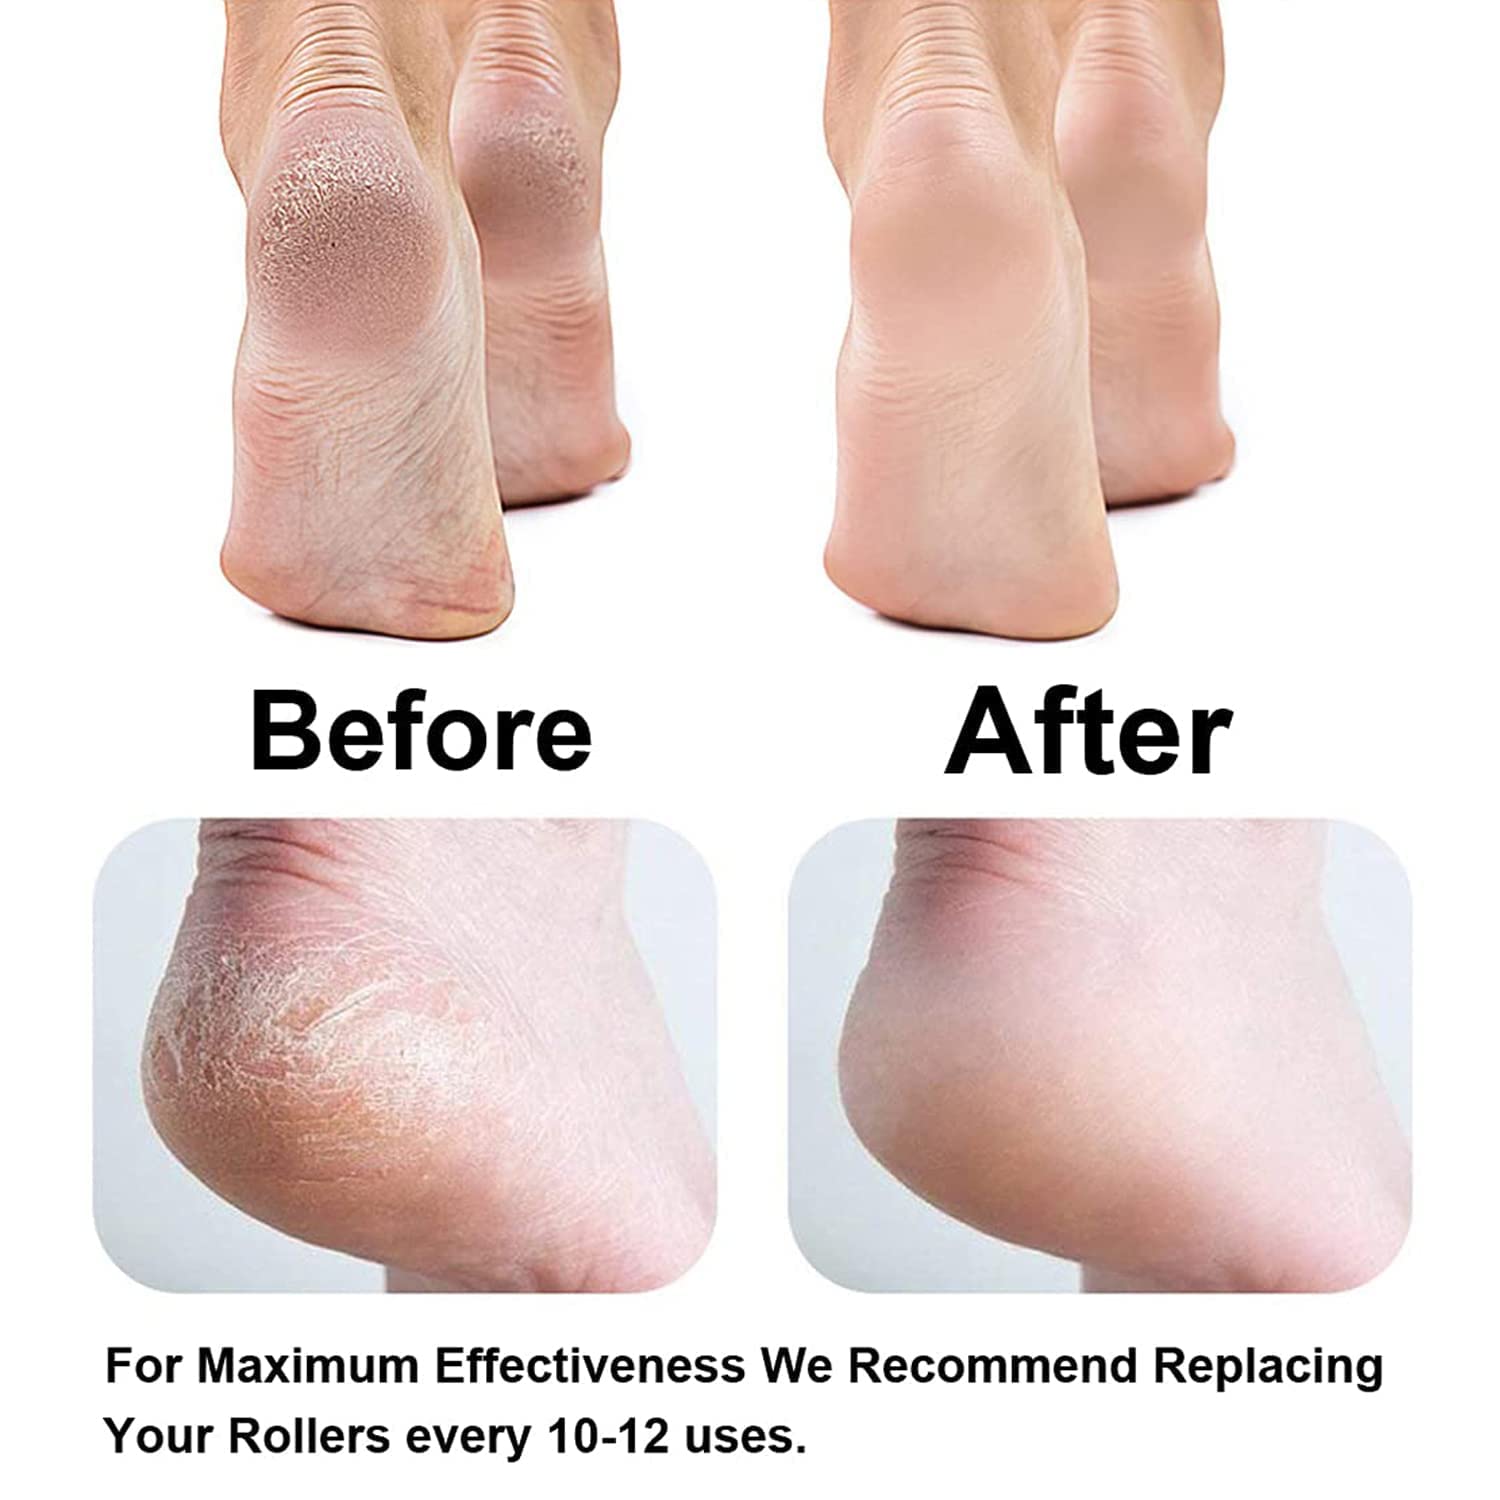 Callus Remover Rechargeable Pedicure Tool for Dead Skin |Foot Roller Callus Remover Hard and Dead Skin Remover |Feet Care Callus Remover | Pedicure for Hard Cracked Skin, Foot Scrubber Roller